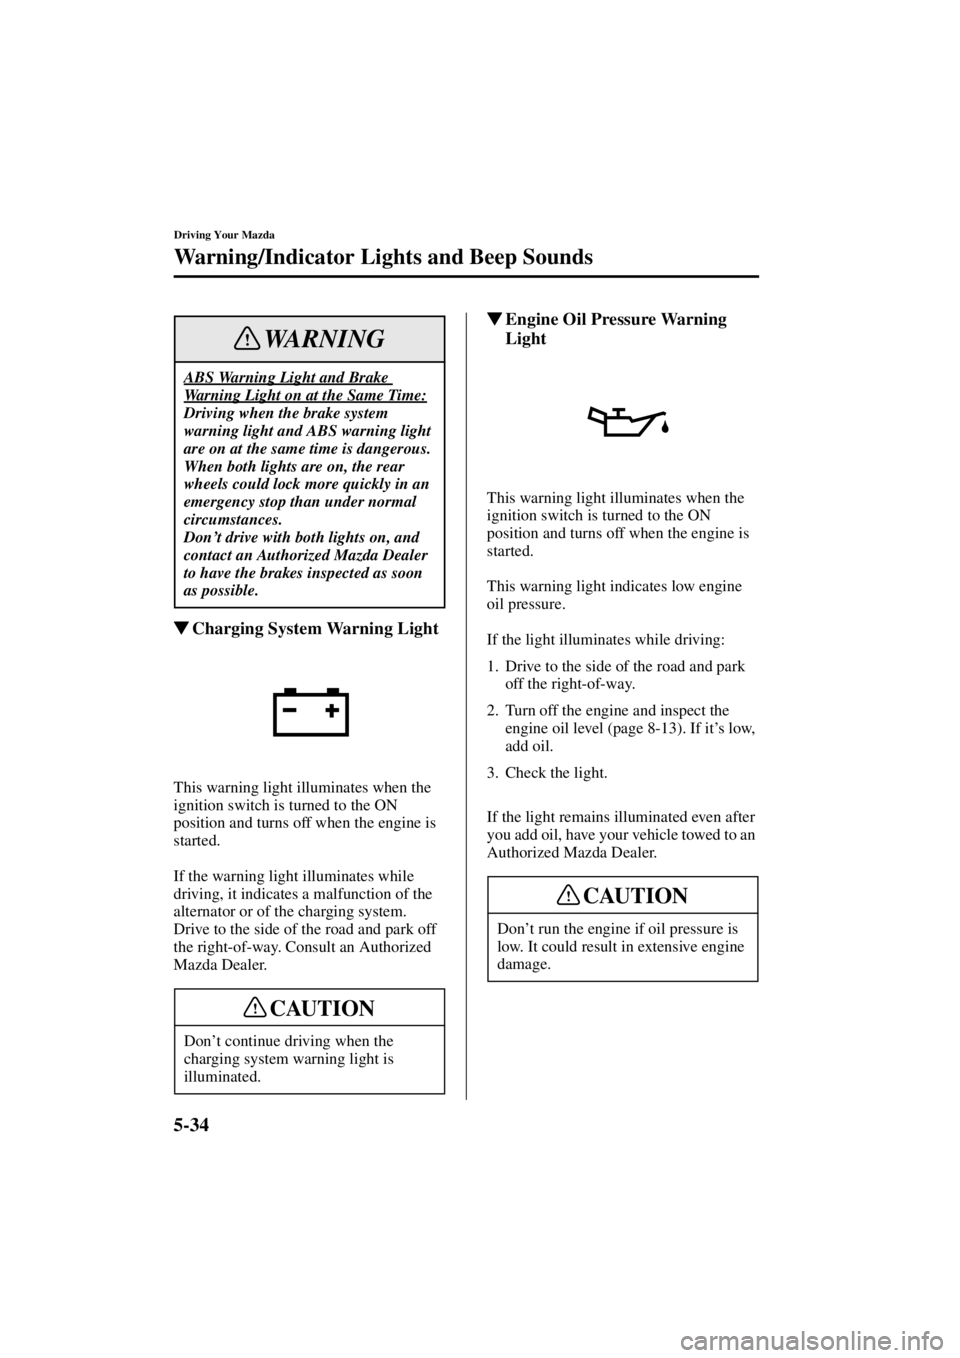 MAZDA MODEL 3 4-DOOR 2004  Owners Manual 5-34
Driving Your Mazda
Warning/Indicator Lights and Beep Sounds
Form No. 8S18-EA-03I
Charging System Warning Light
This warning light illuminates when the 
ignition switch is turned to the ON 
posit